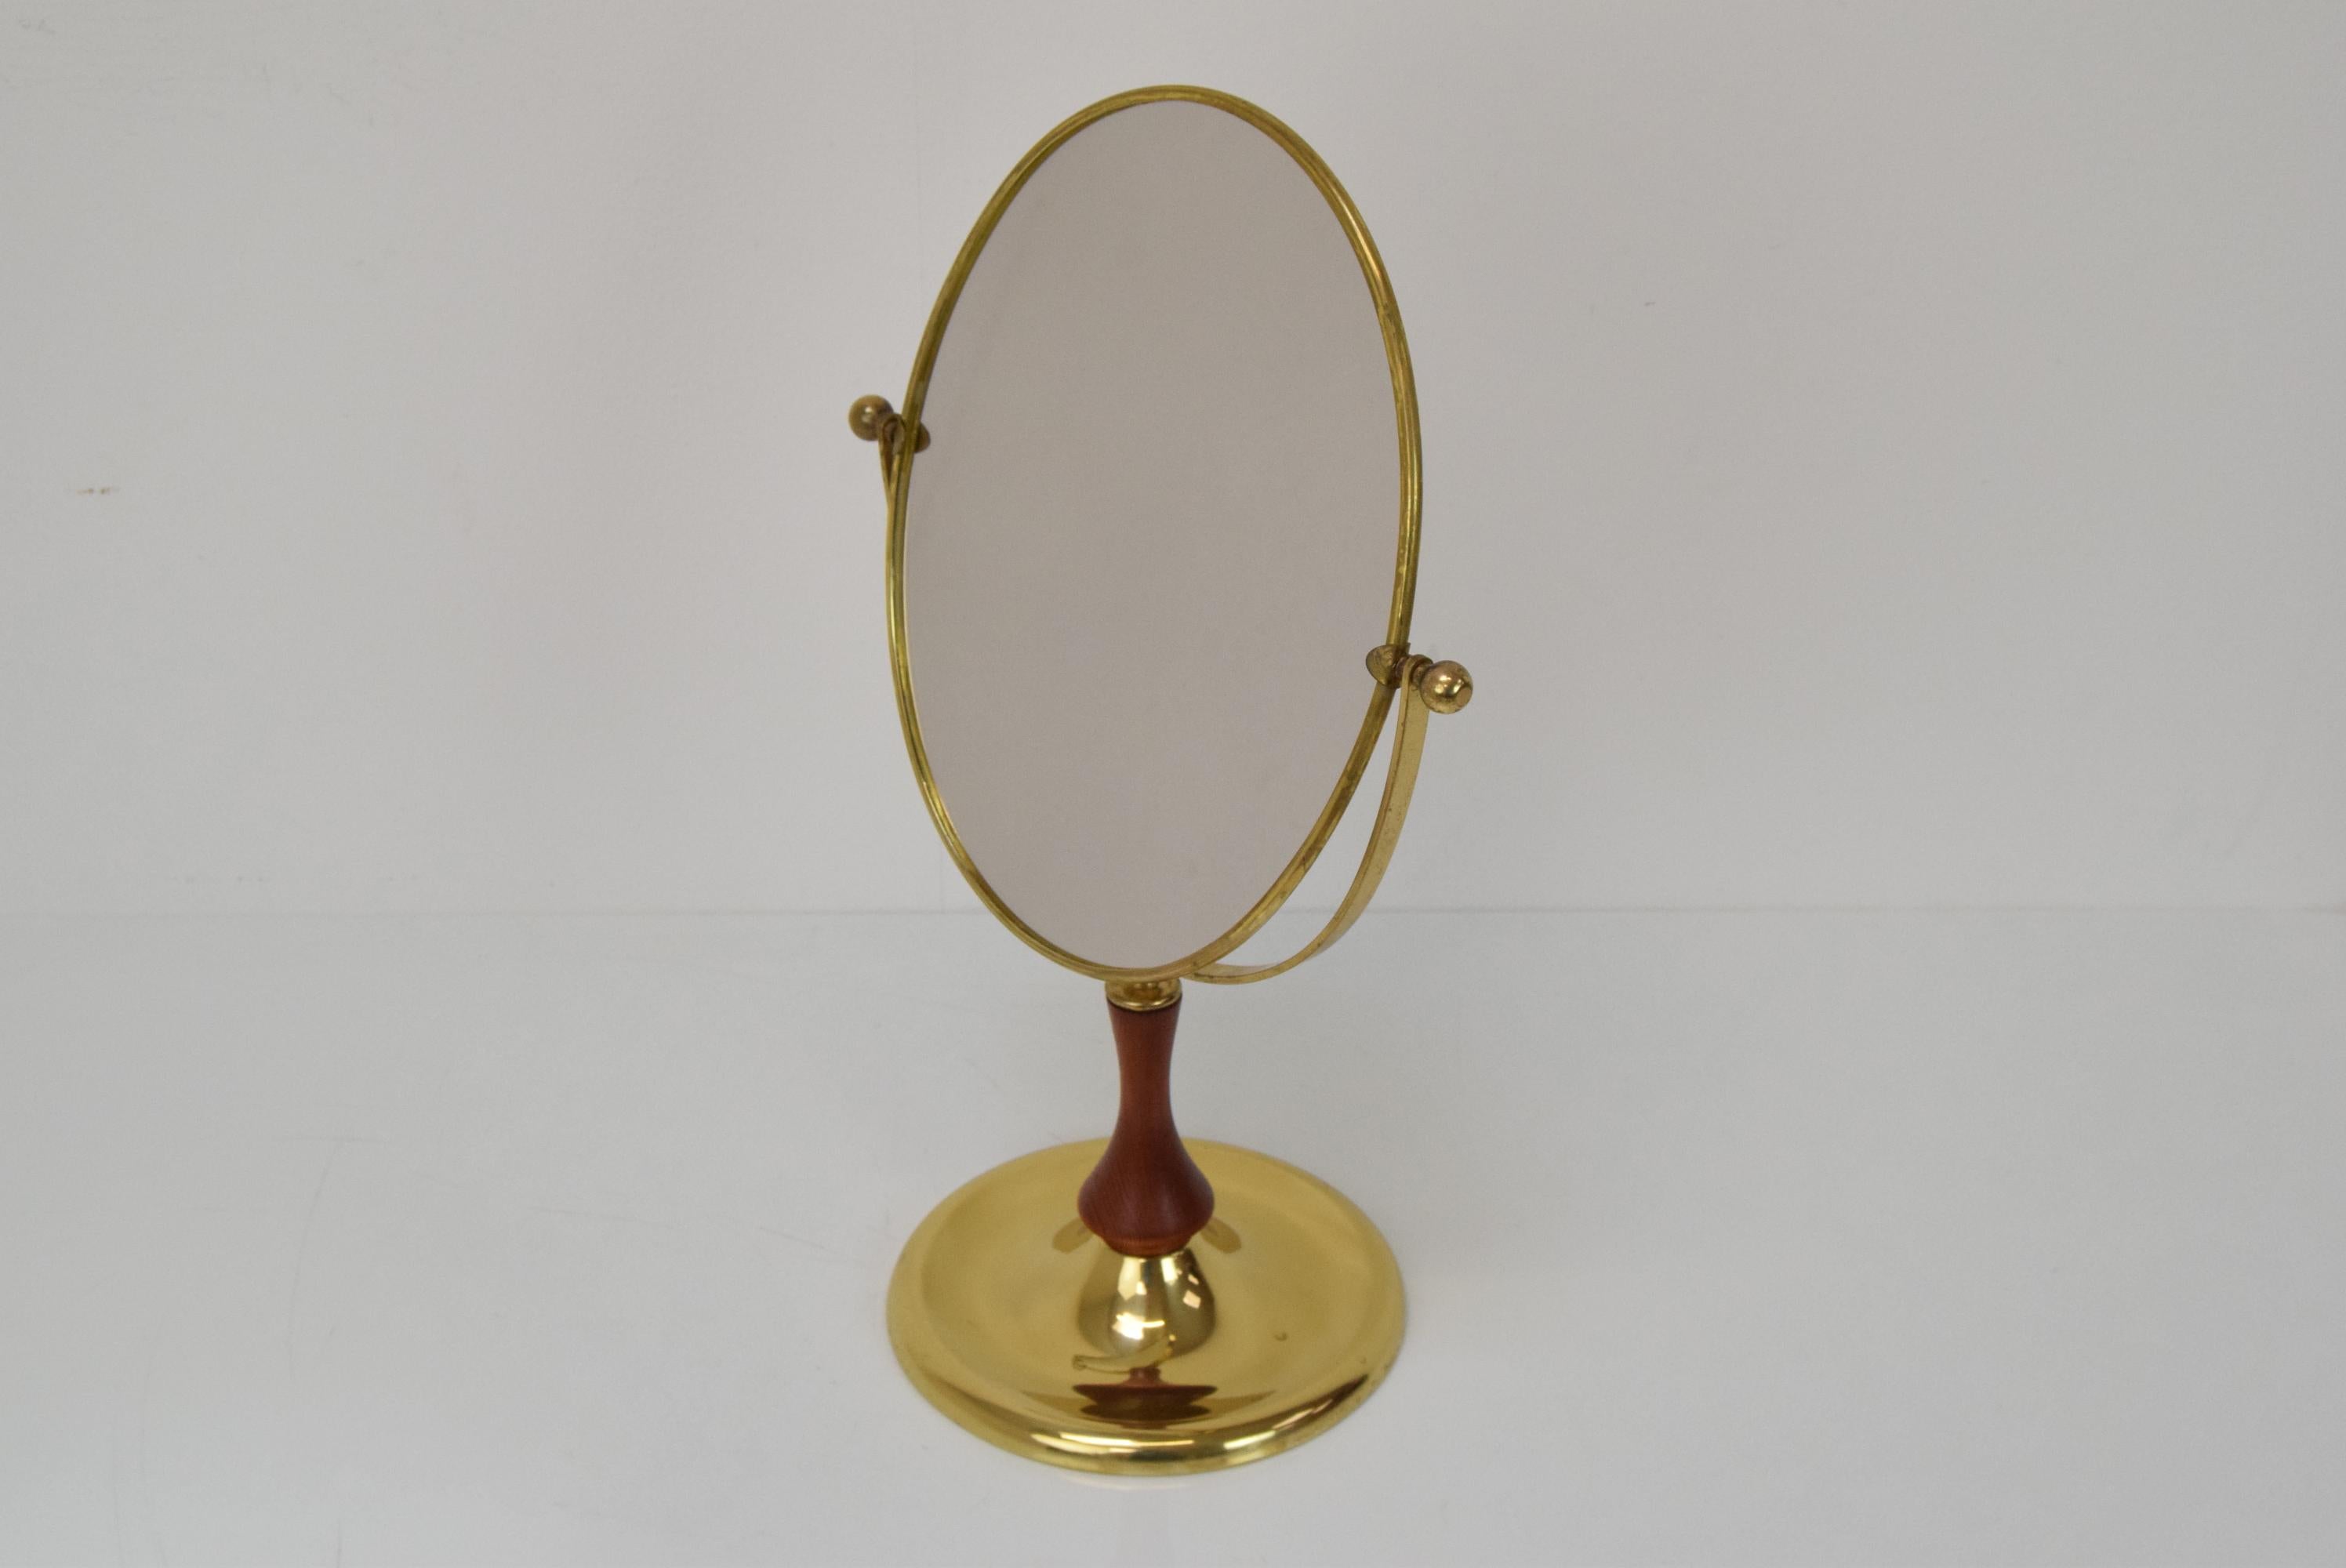 Czech Midcentury Table Adjustable Mirror, 1960s For Sale